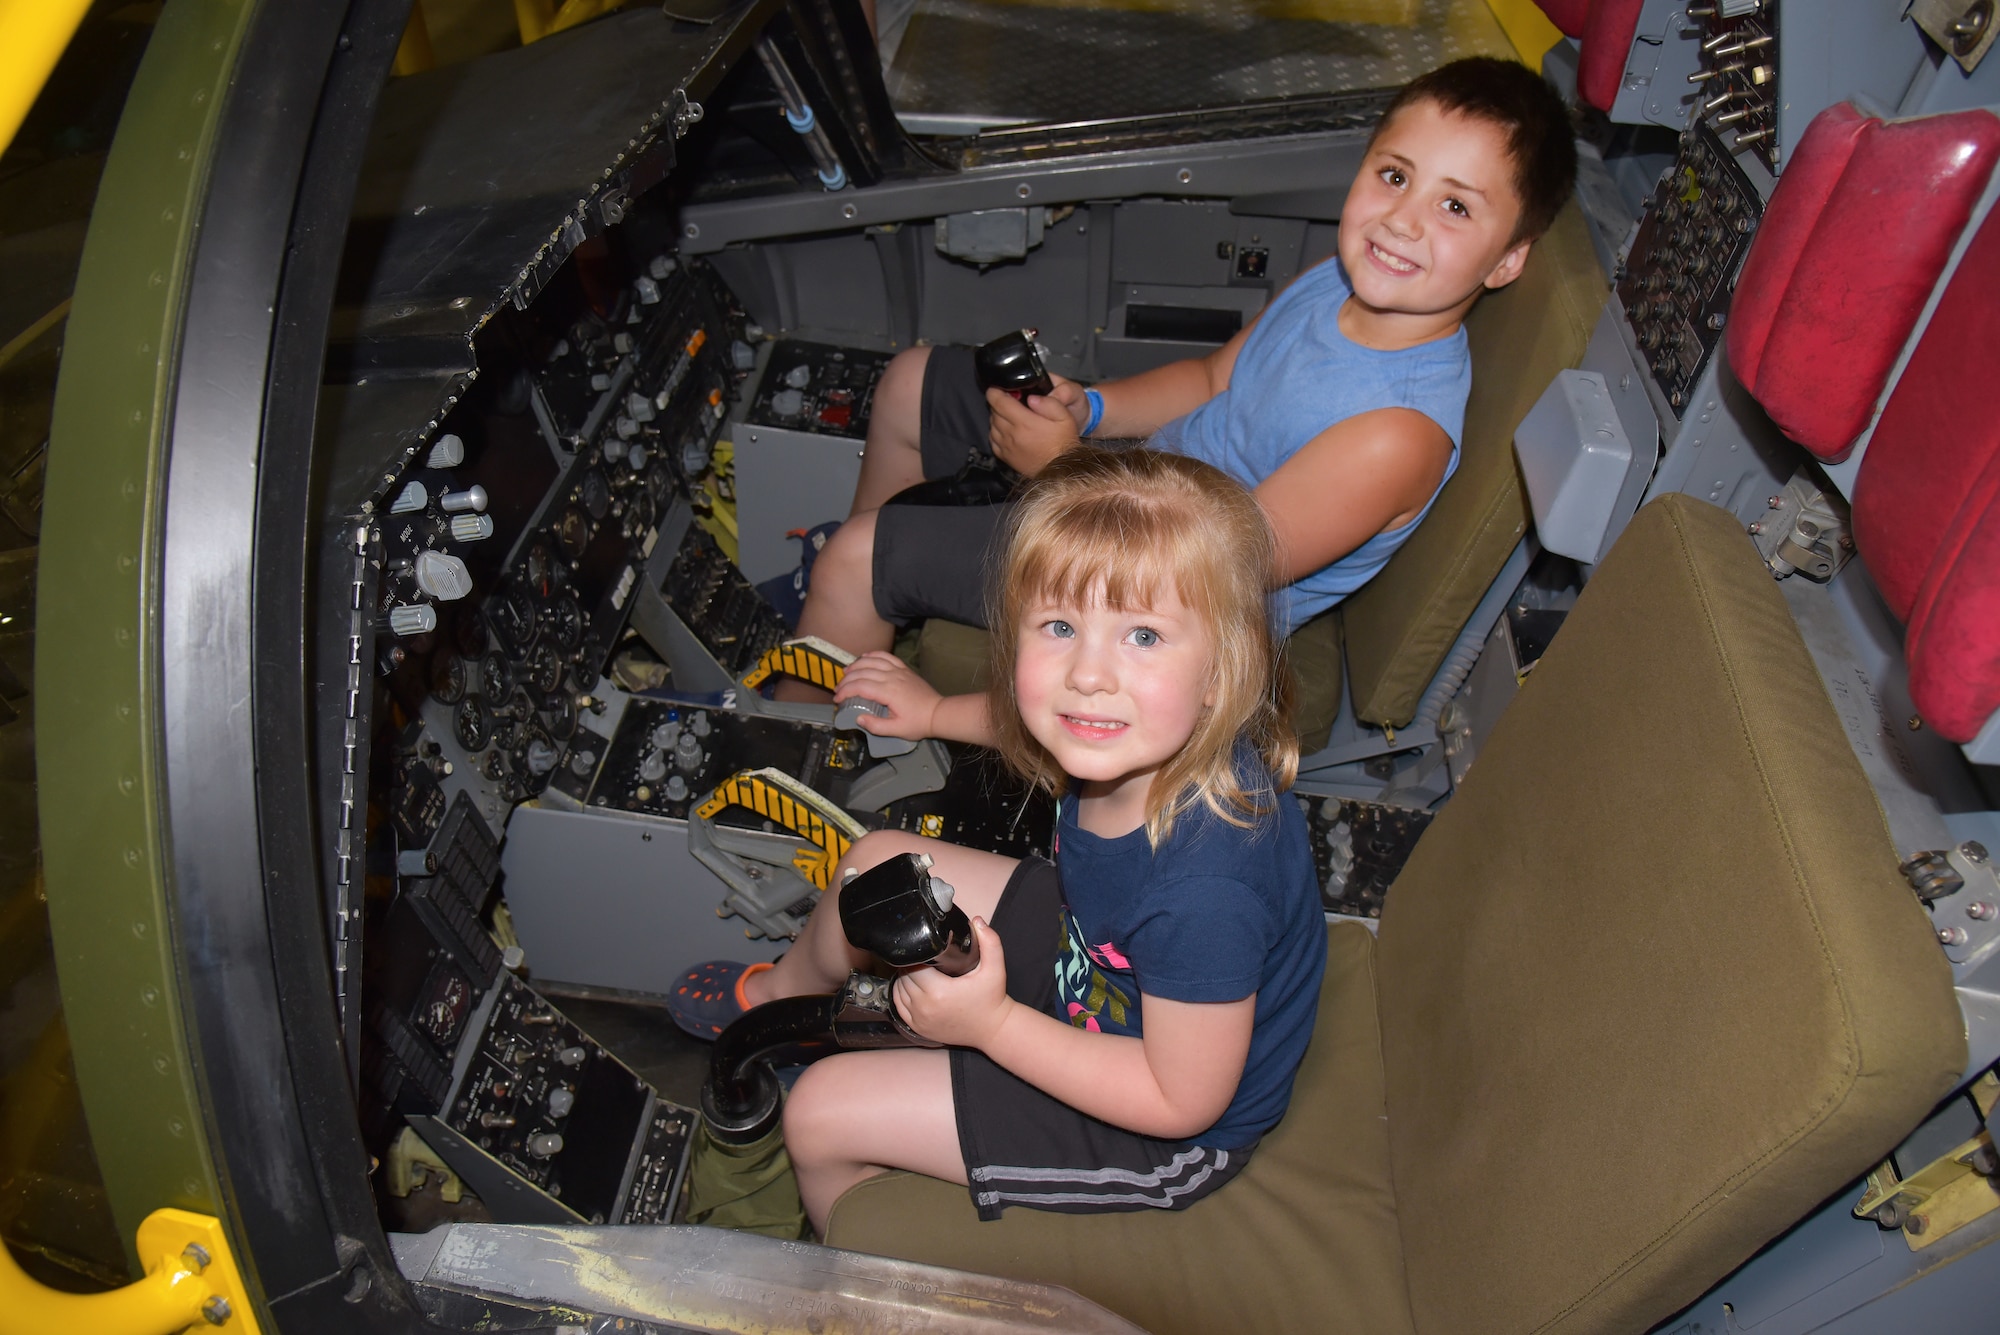 DAYTON, Ohio - Museum visitors enjoying the FB-111A Sit-in Cockpit in the Cold War Gallery at the National Museum of the U.S. Air Force. (U.S. Air Force photo)